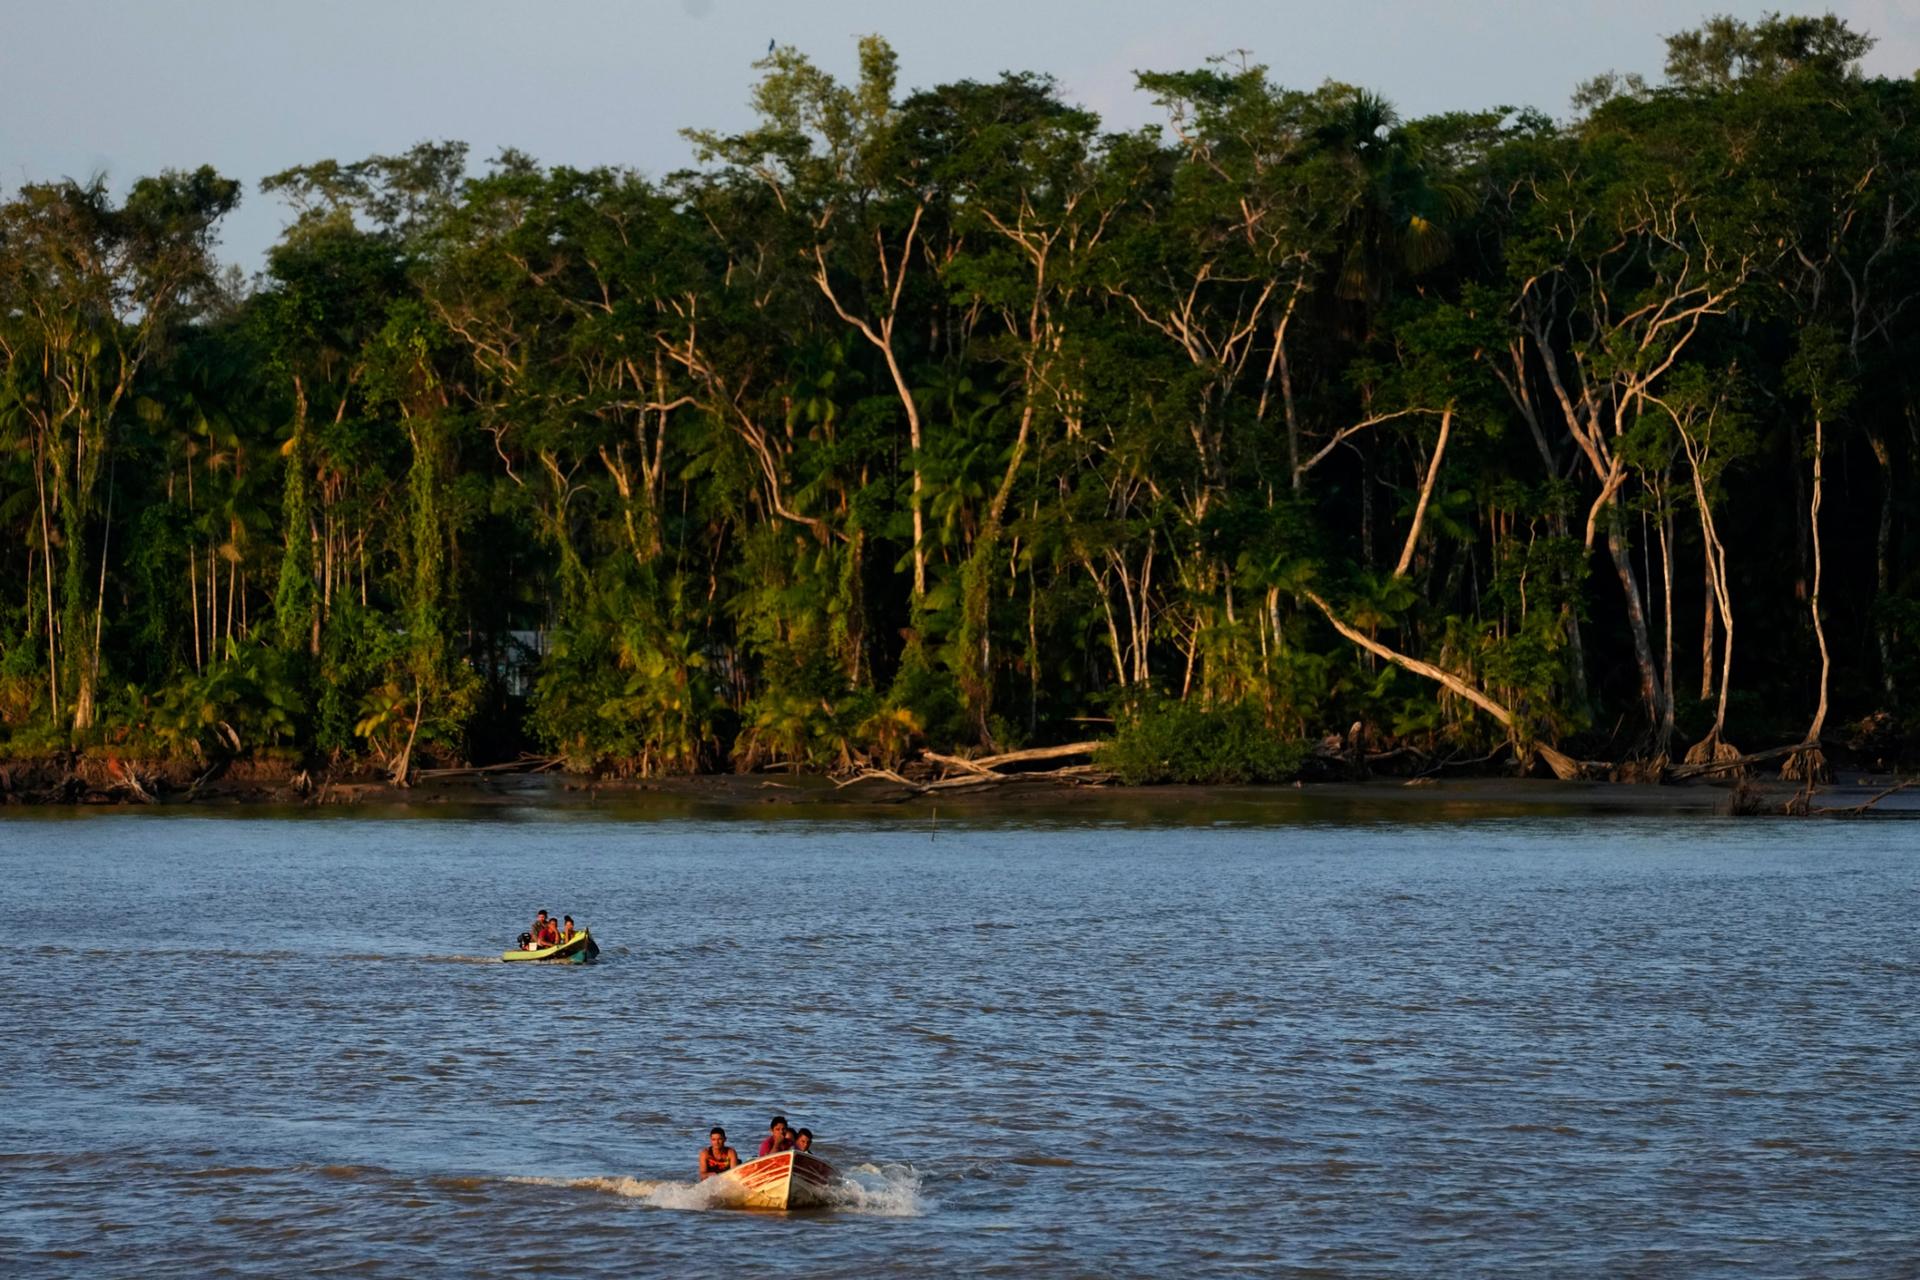 Small boats move in front of an island where trees have fallen in the Bailique archipelago district of Macapá, in the state of Amapa, in northern Brazil, Sept. 12, 2022.